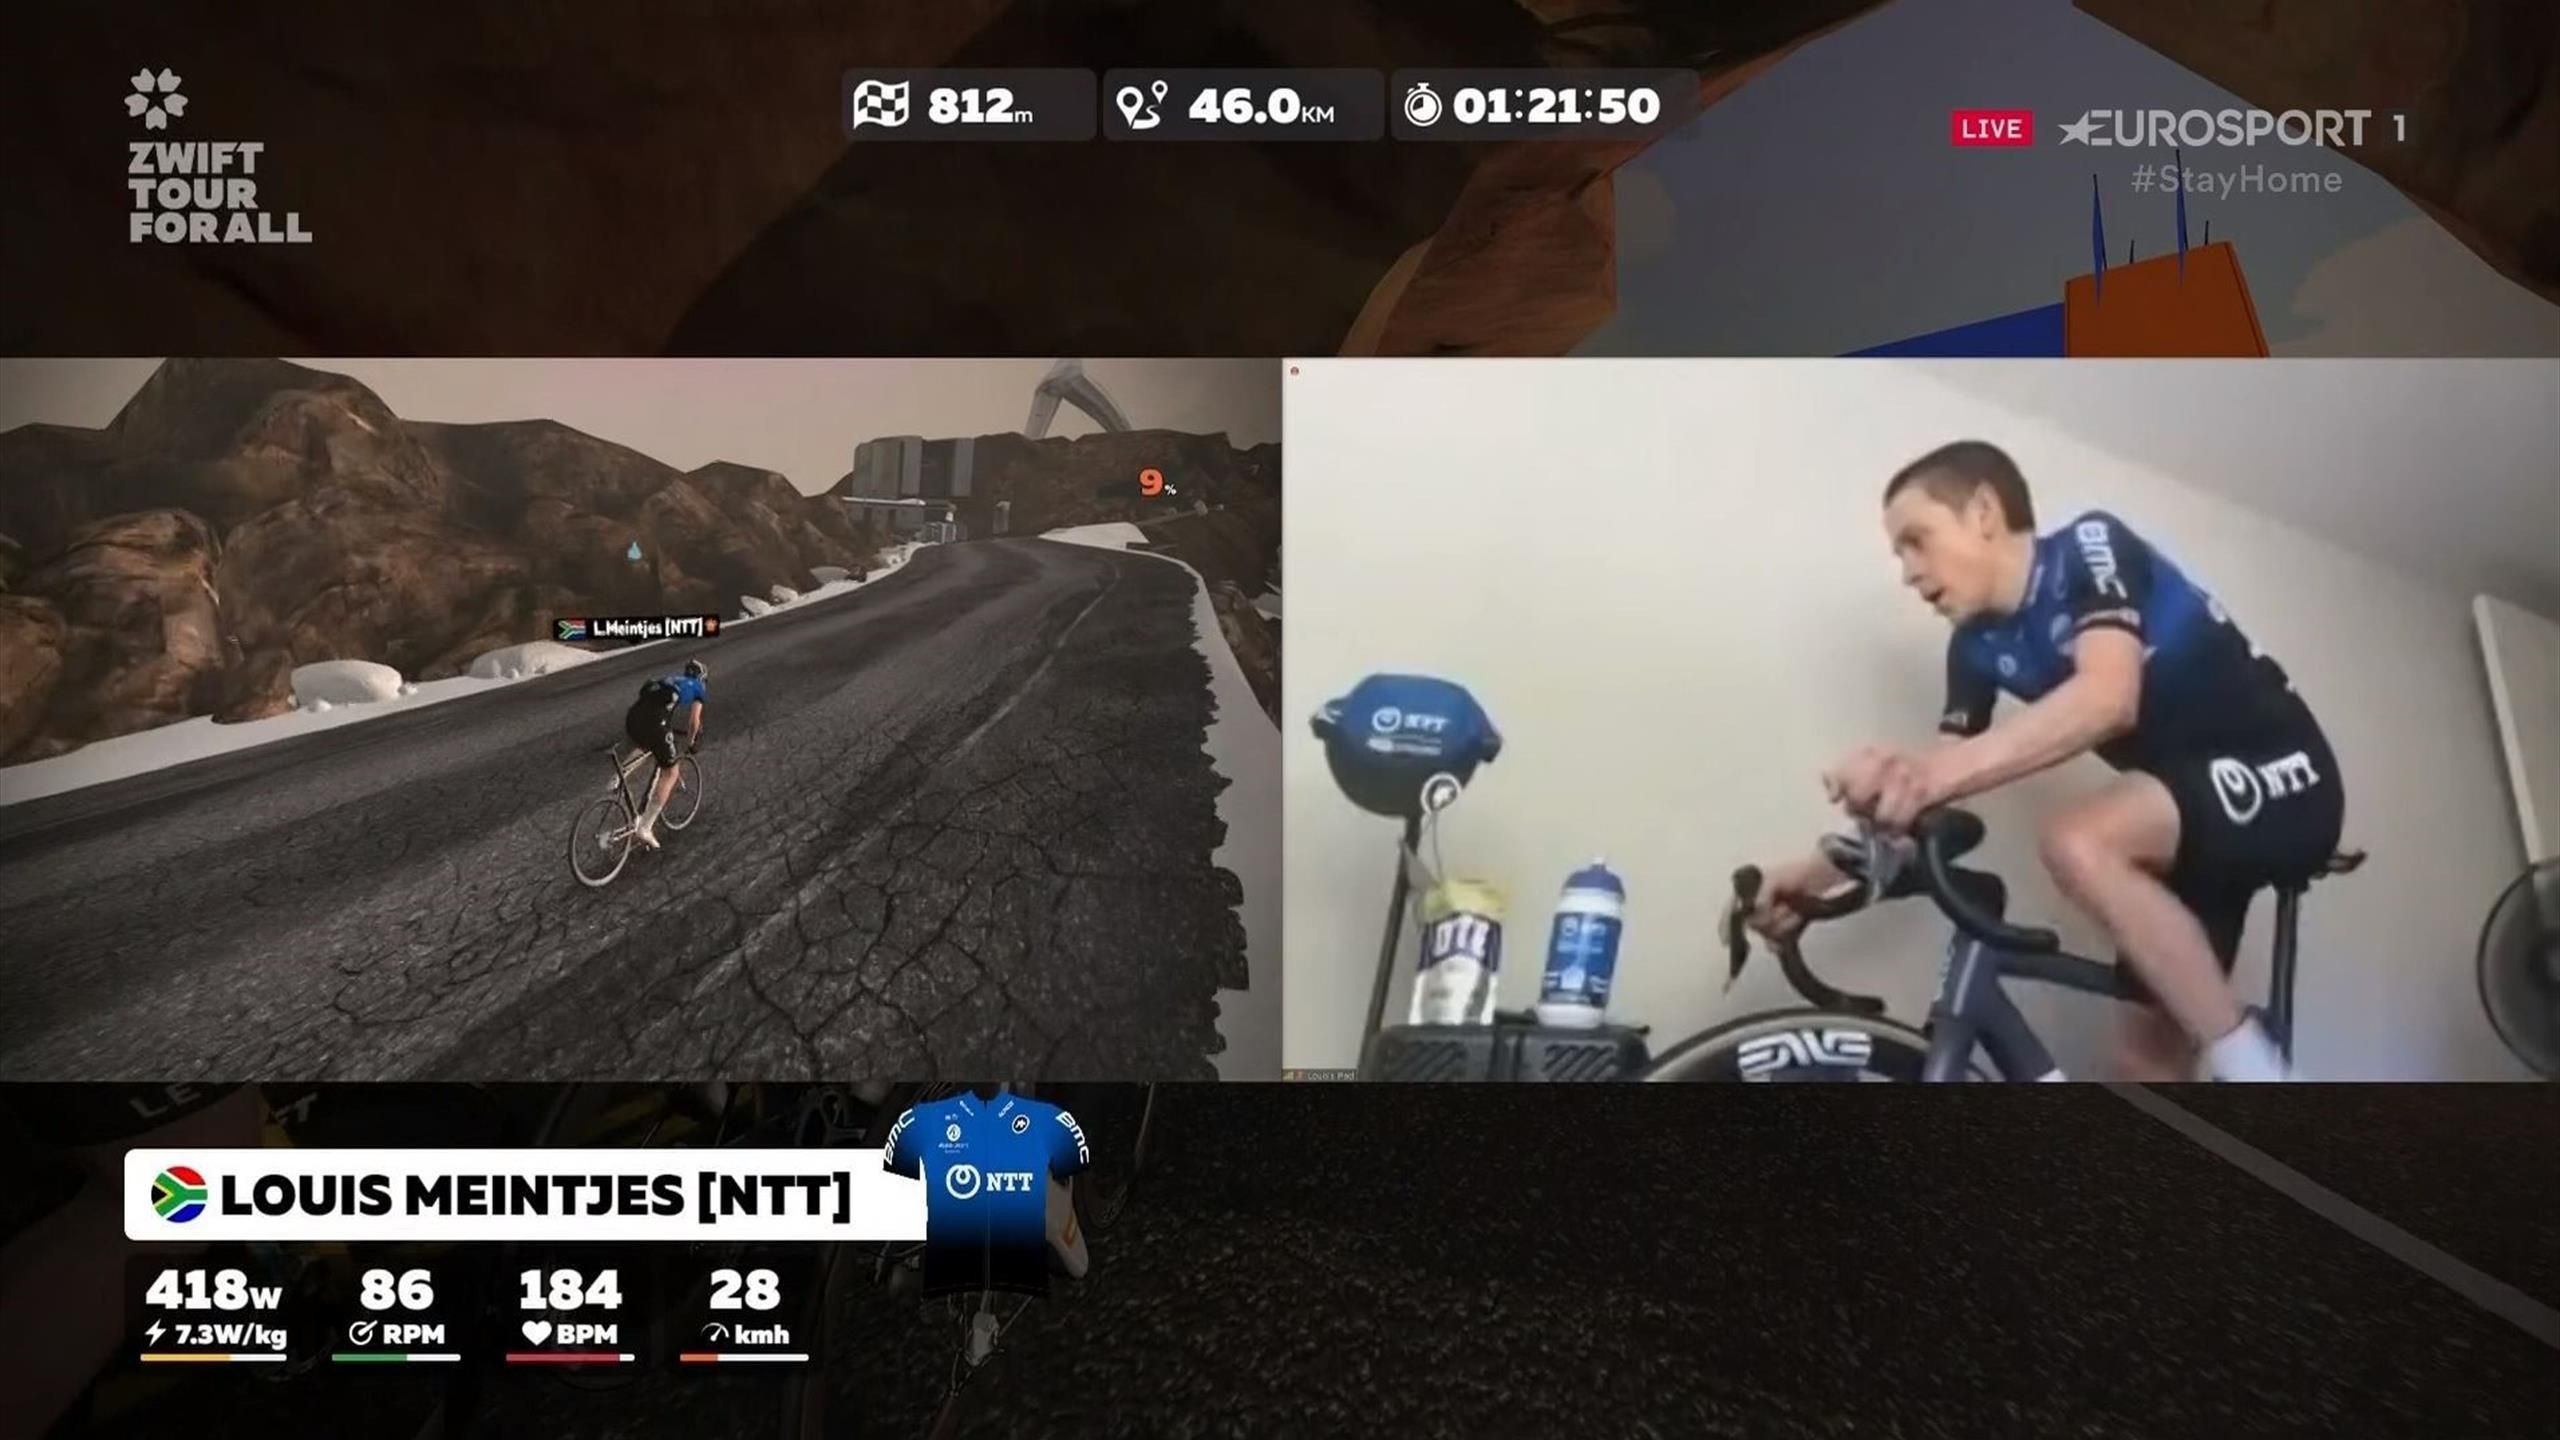 Cycling news - Louis Meintjes beats Lucas Hamilton to win stage five of Zwift Tour for All